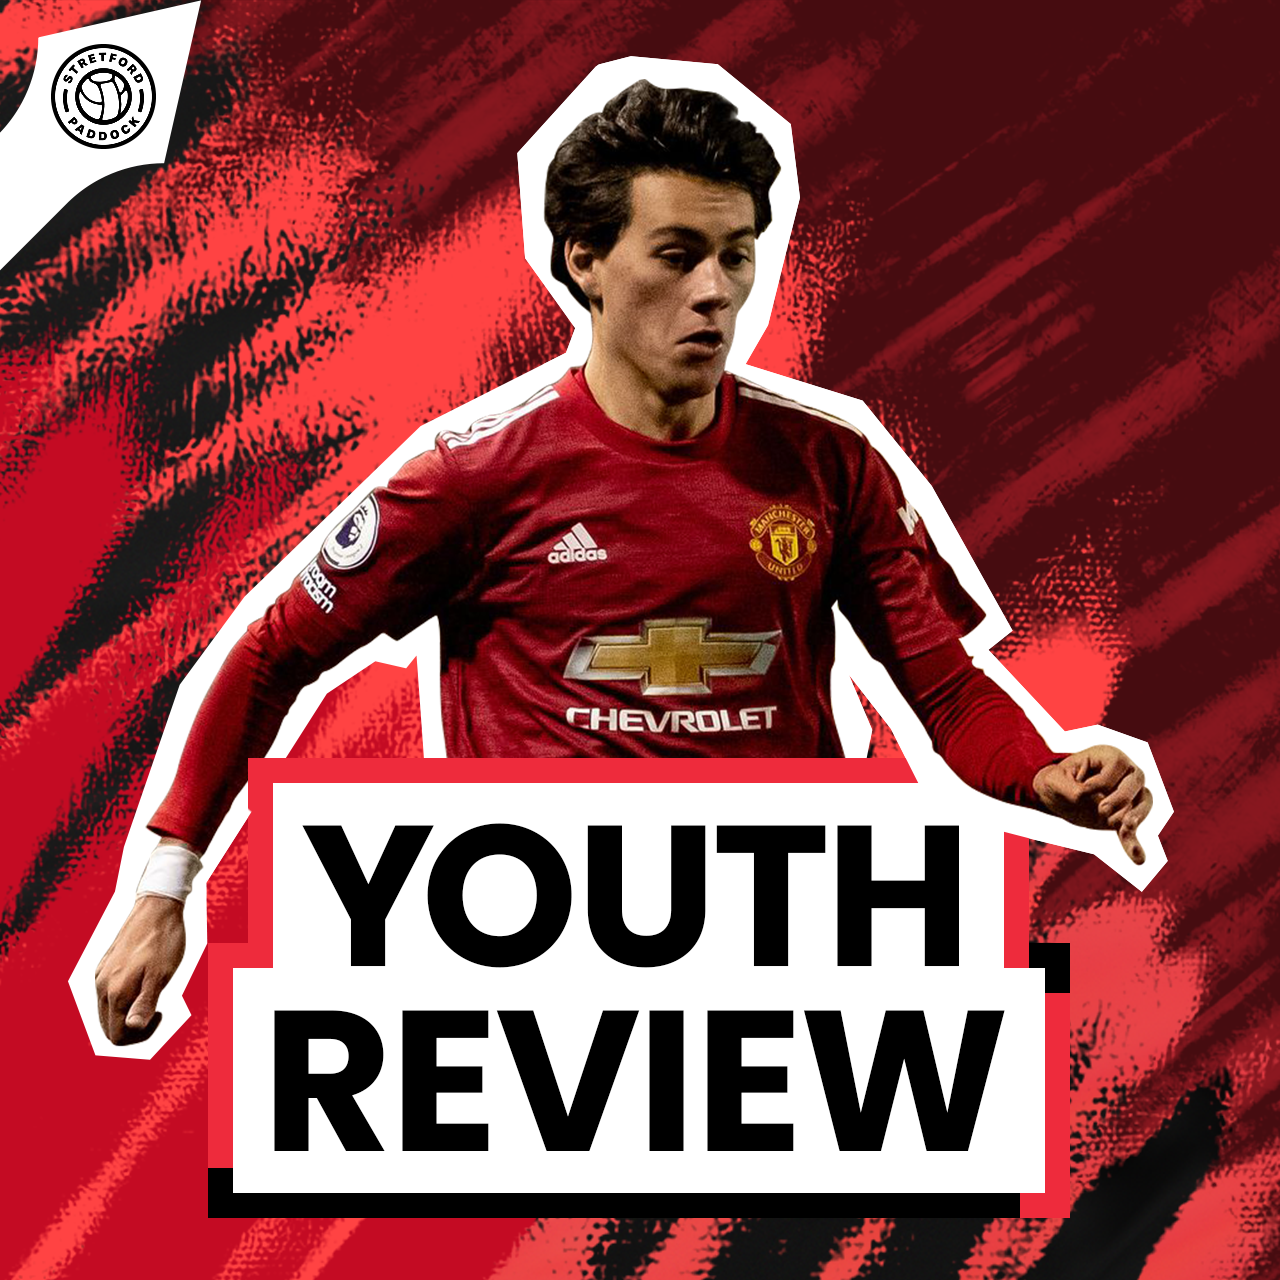 New Signing Edges Closer To First Team! | Youth Review - Manchester